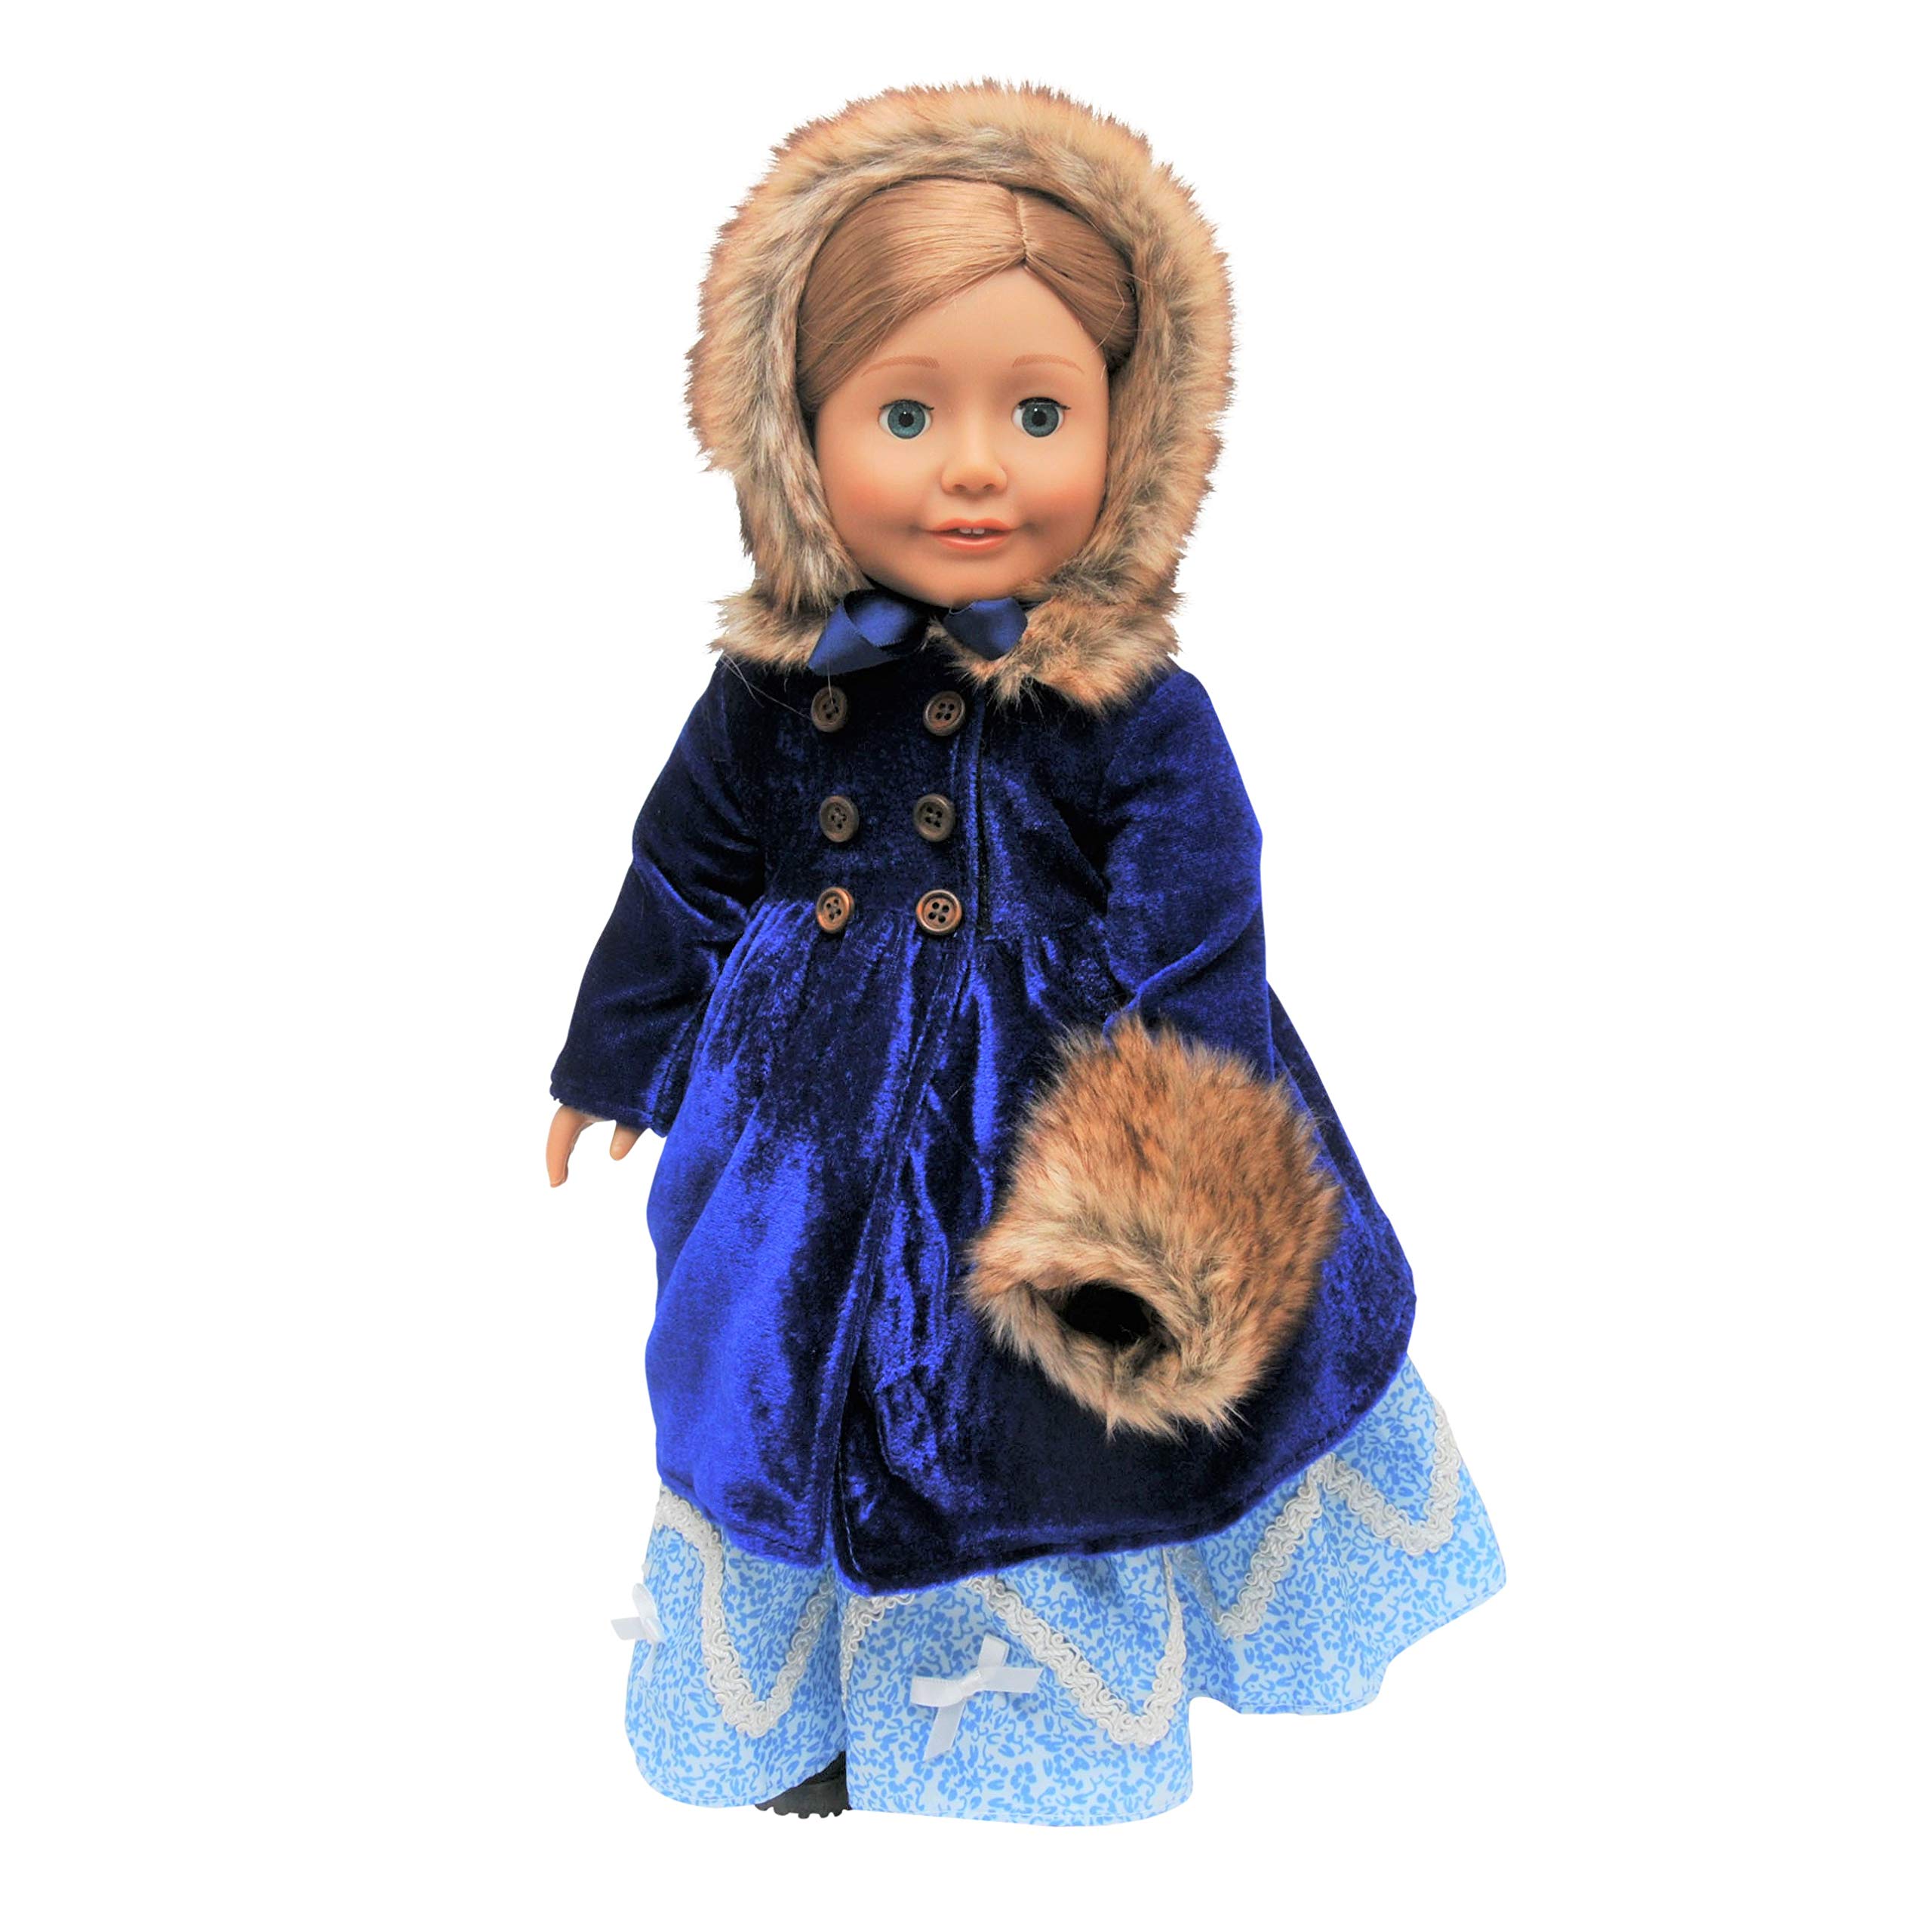 The Queen's Treasures 18" Doll Clothes Outfit, Blue Velvet 1800's Style Polyester-Fur Trimmed Coat, Hat, and Hand Warmer, Compatible for Use with American Girl Dolls, Doll NOT Included